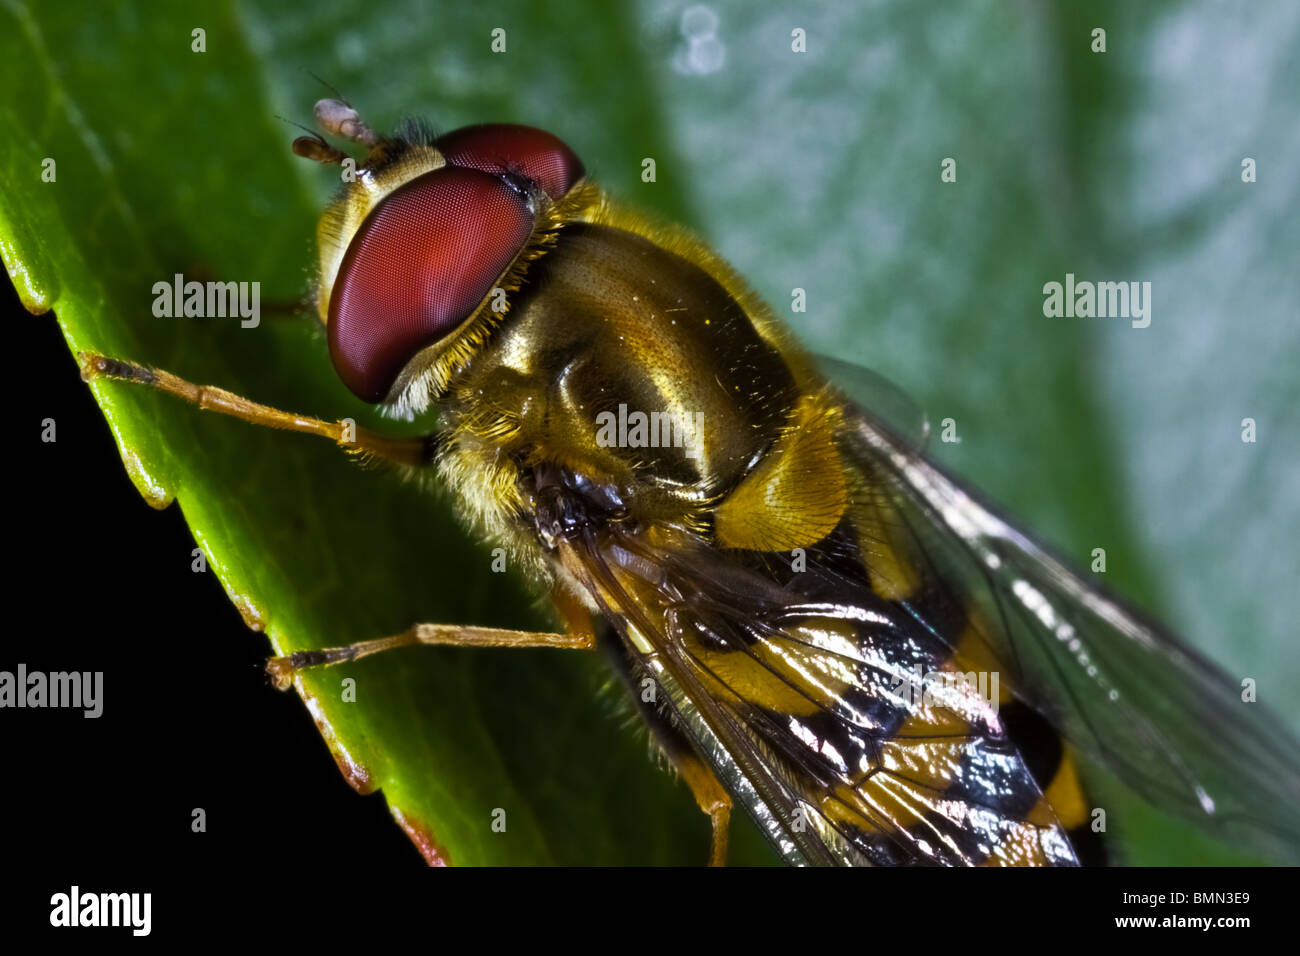 Golden fly with red eyes Stock Photo - Alamy